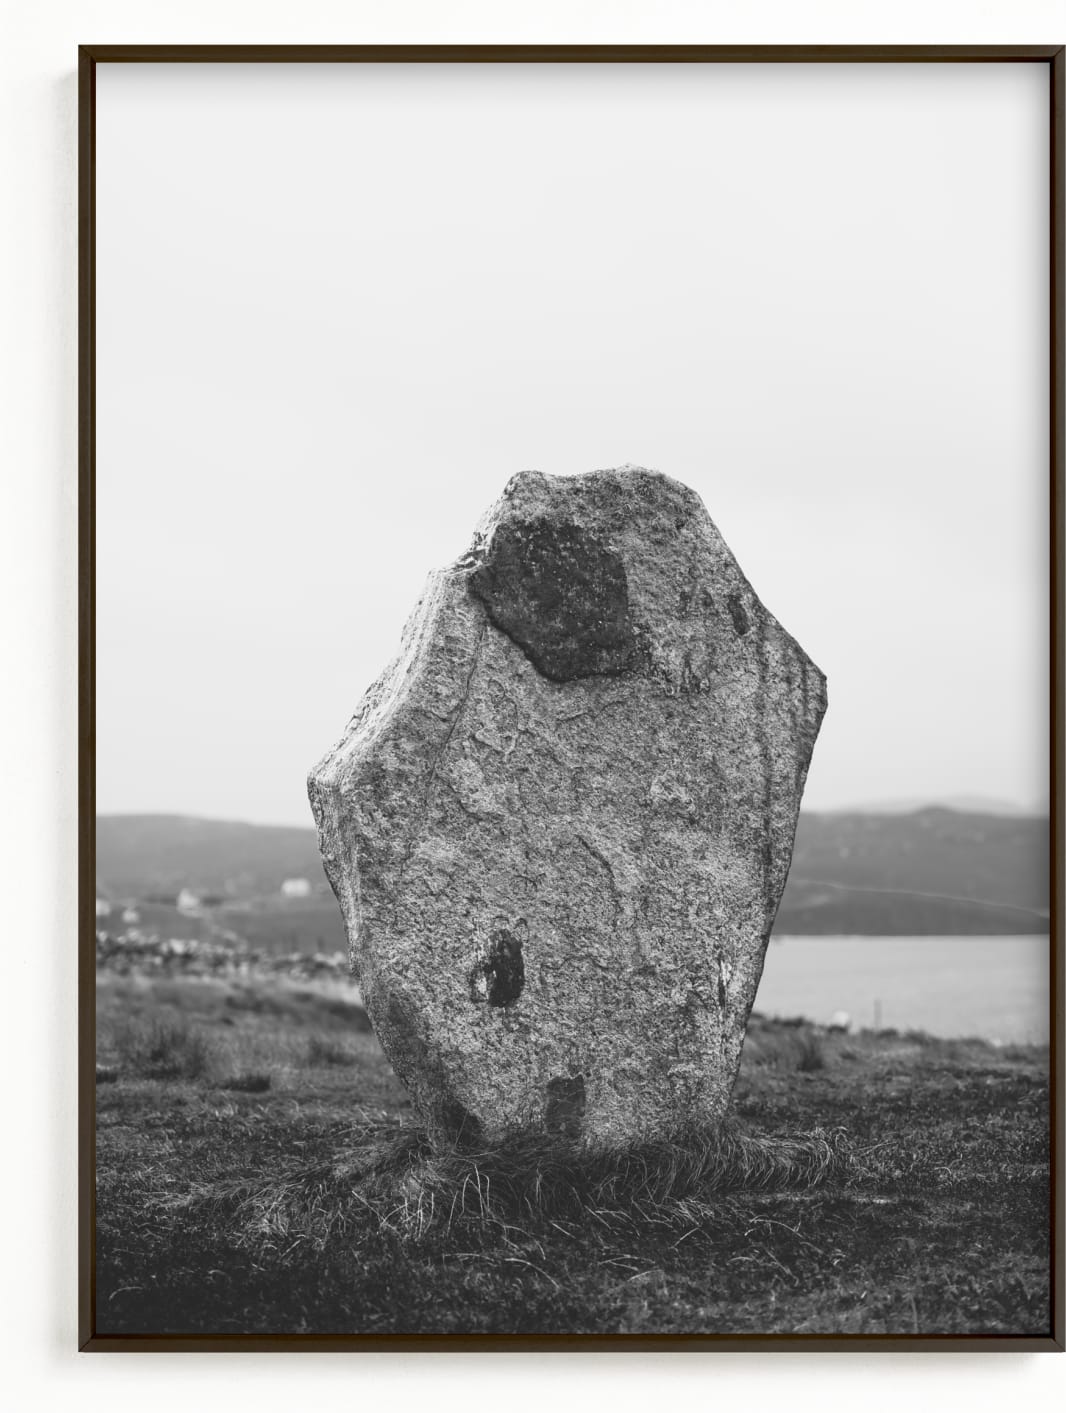 This is a black and white art by Kamala Nahas called Standing Stones I.